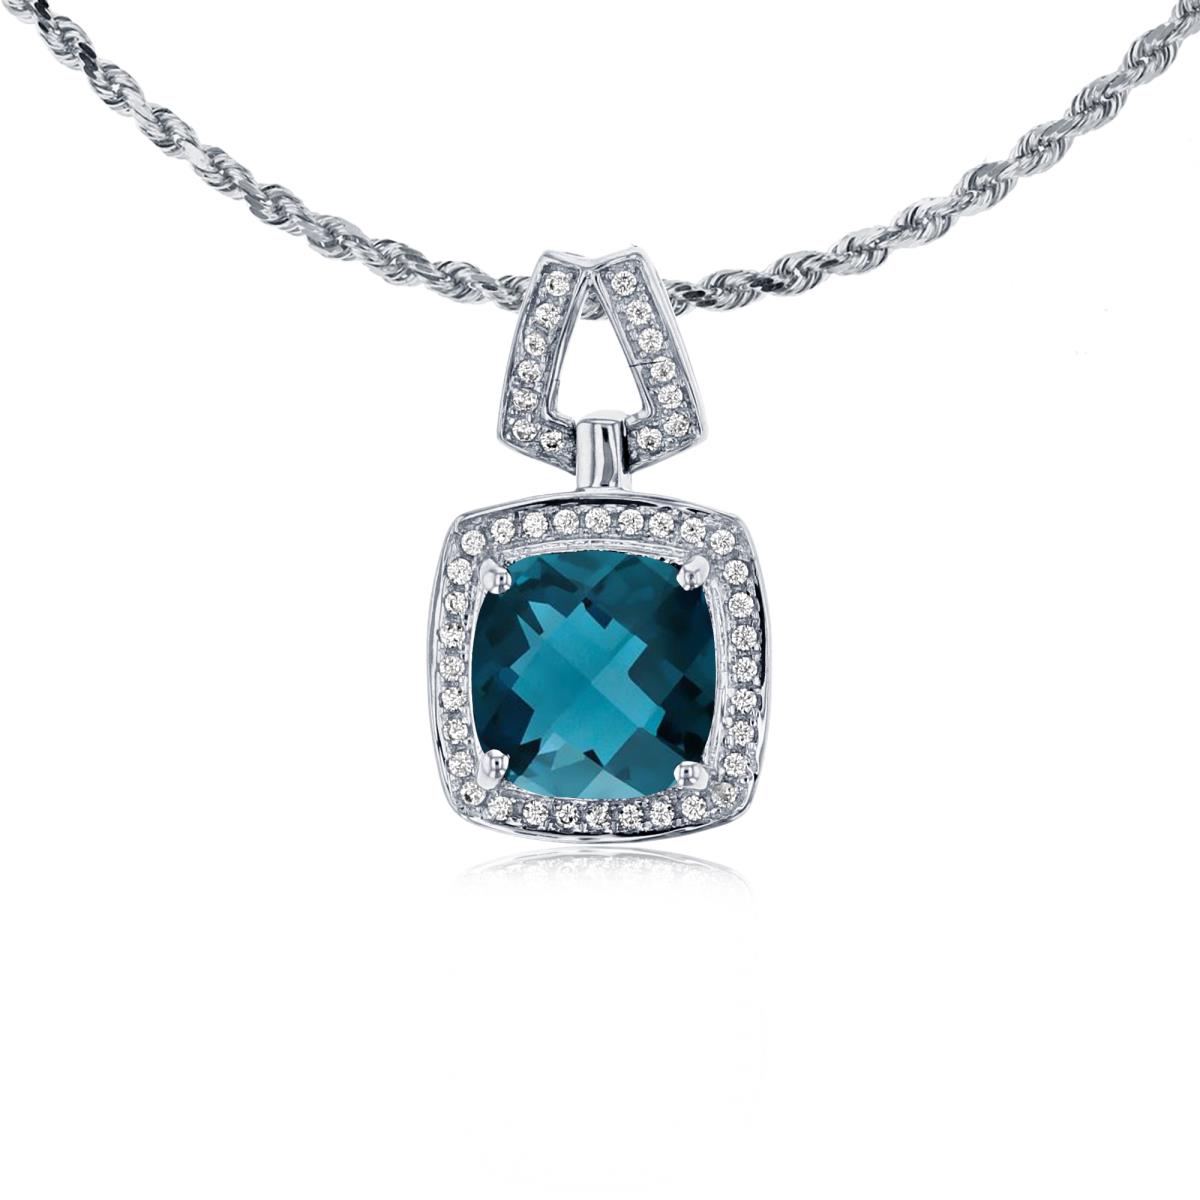 10K White Gold 7mm Cushion London Blue Topaz & 0.10 CTTW Diamond Halo 18" Rope Chain Necklace